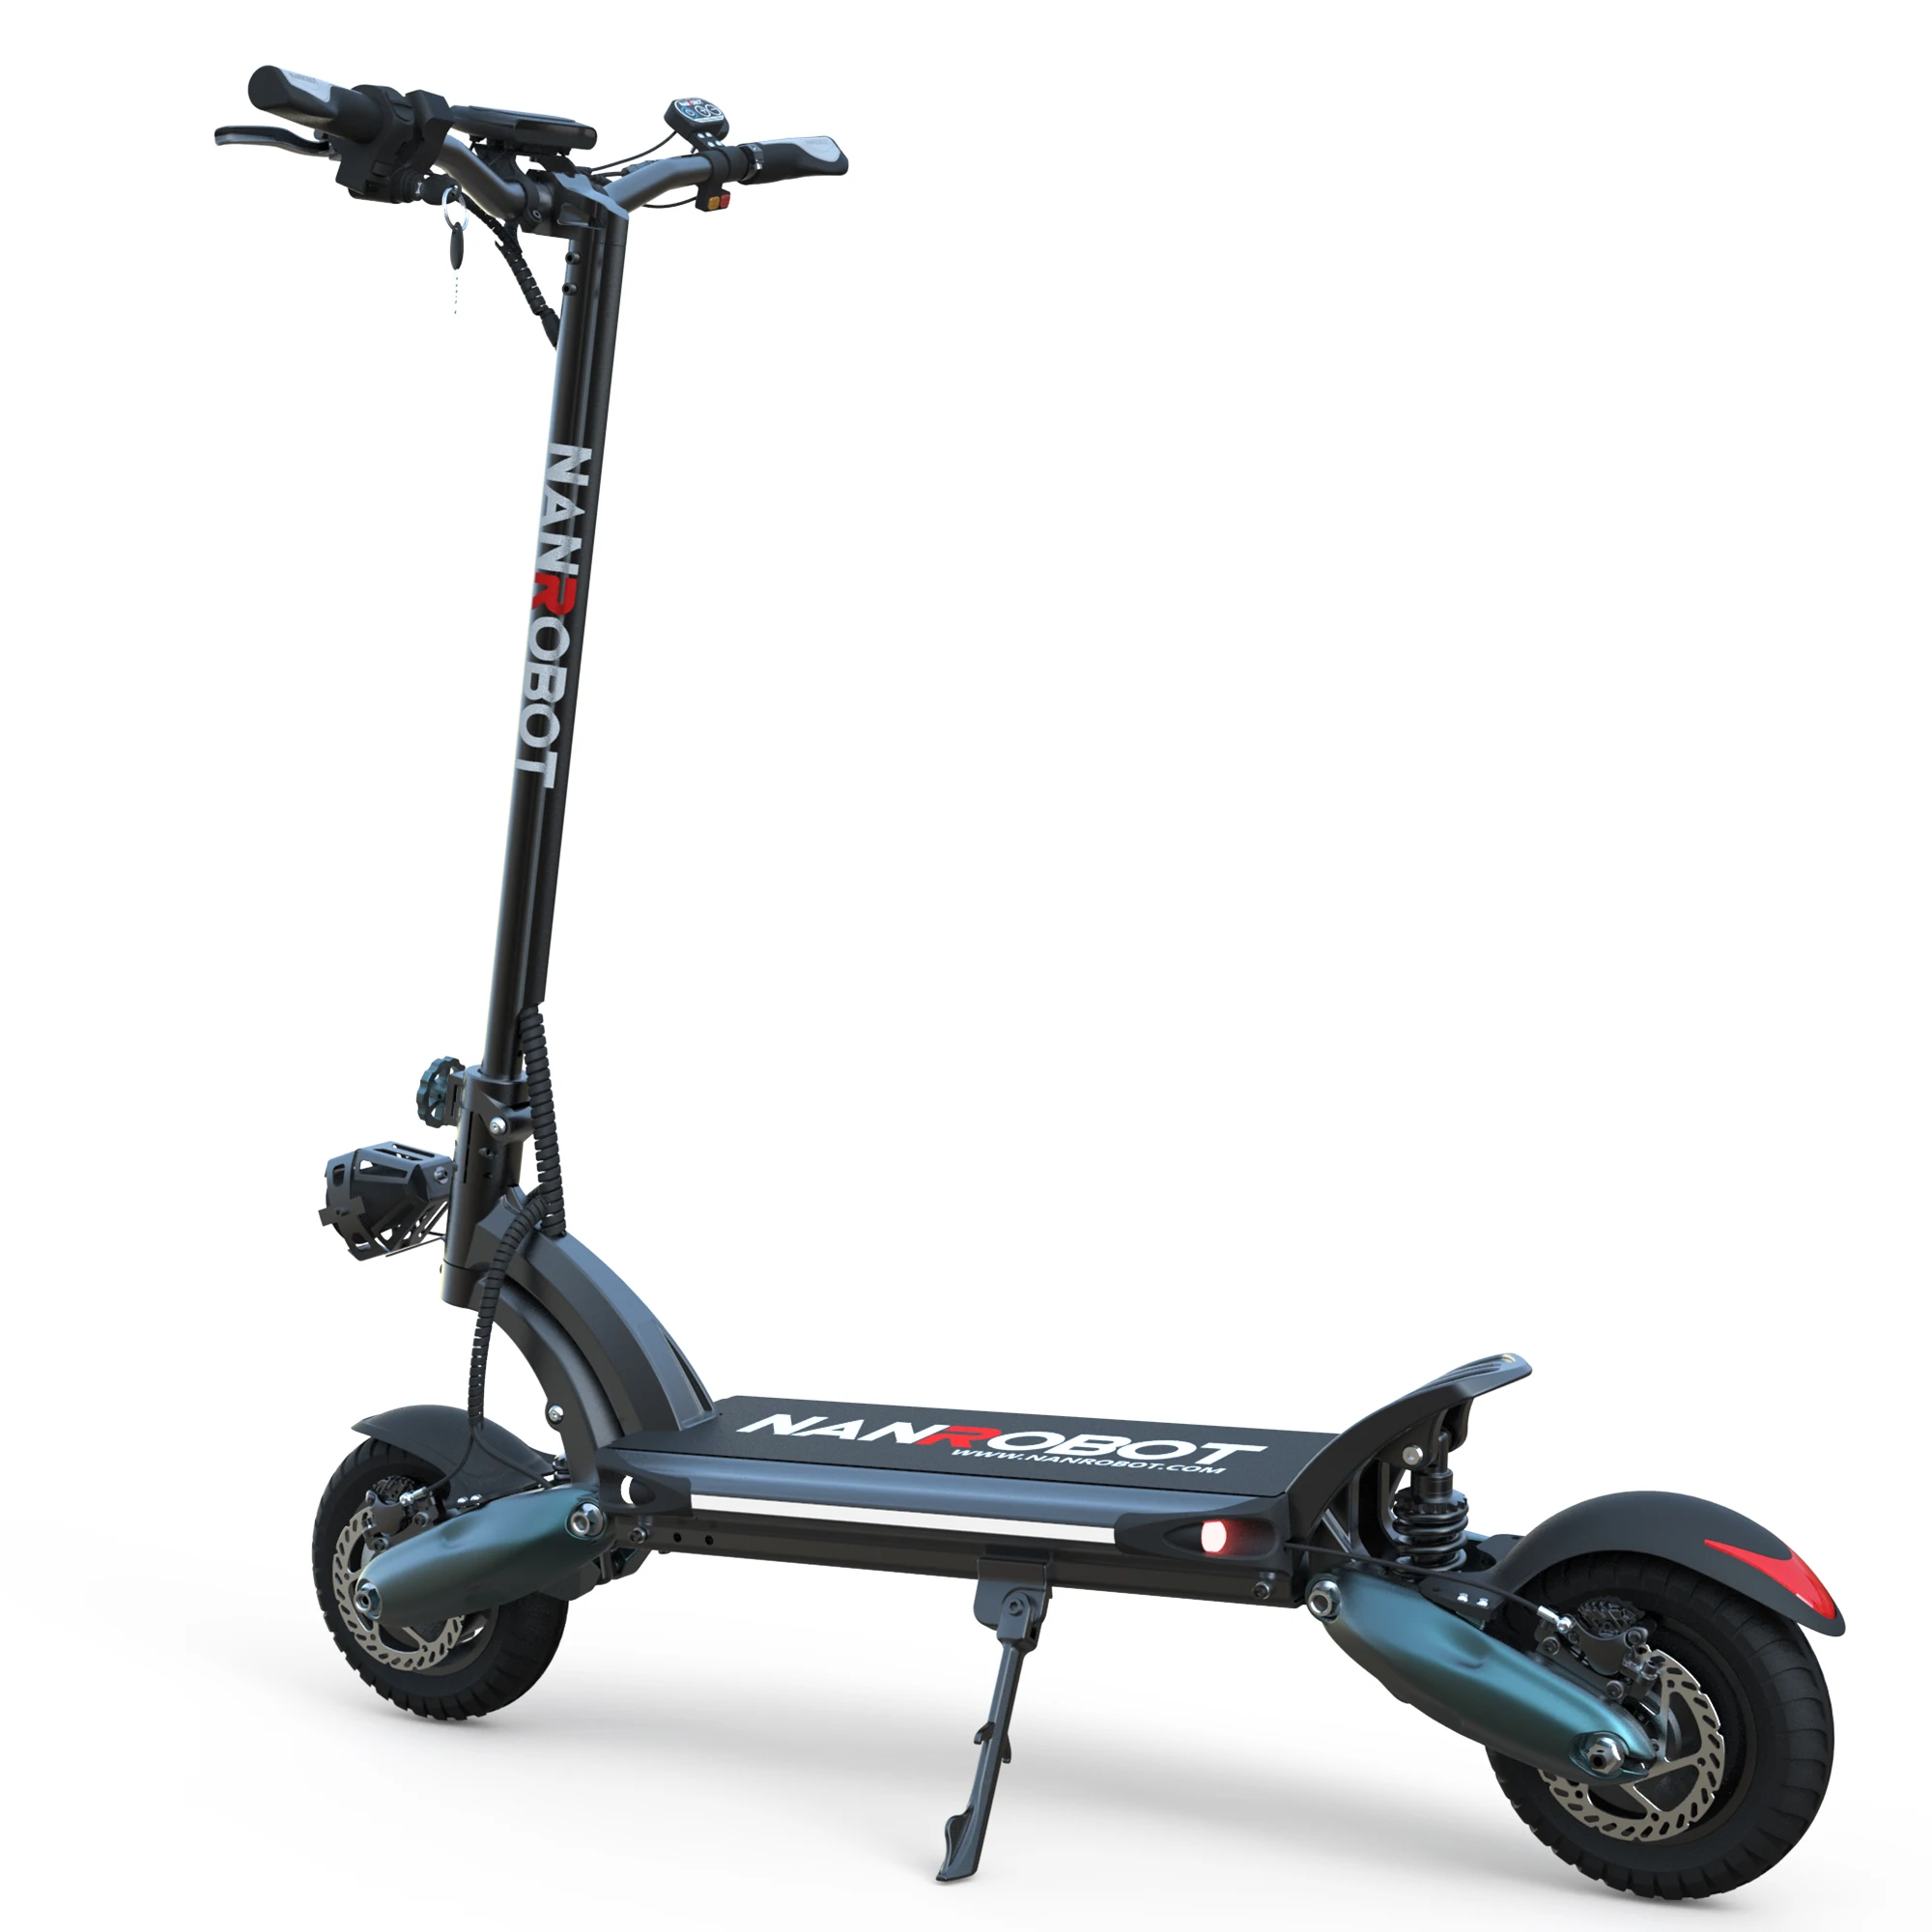 Nanrobot electric scooter D6+ adult scooter Off-road Tyre fastest Dual Motors 2000W Disc Brake for adultscustom ienyrid x8 balancing electric scooter for adult 350w 2 dual motors 10 inch off road tires 15km h max speed 4ah battery for 12km range 100kg load app control